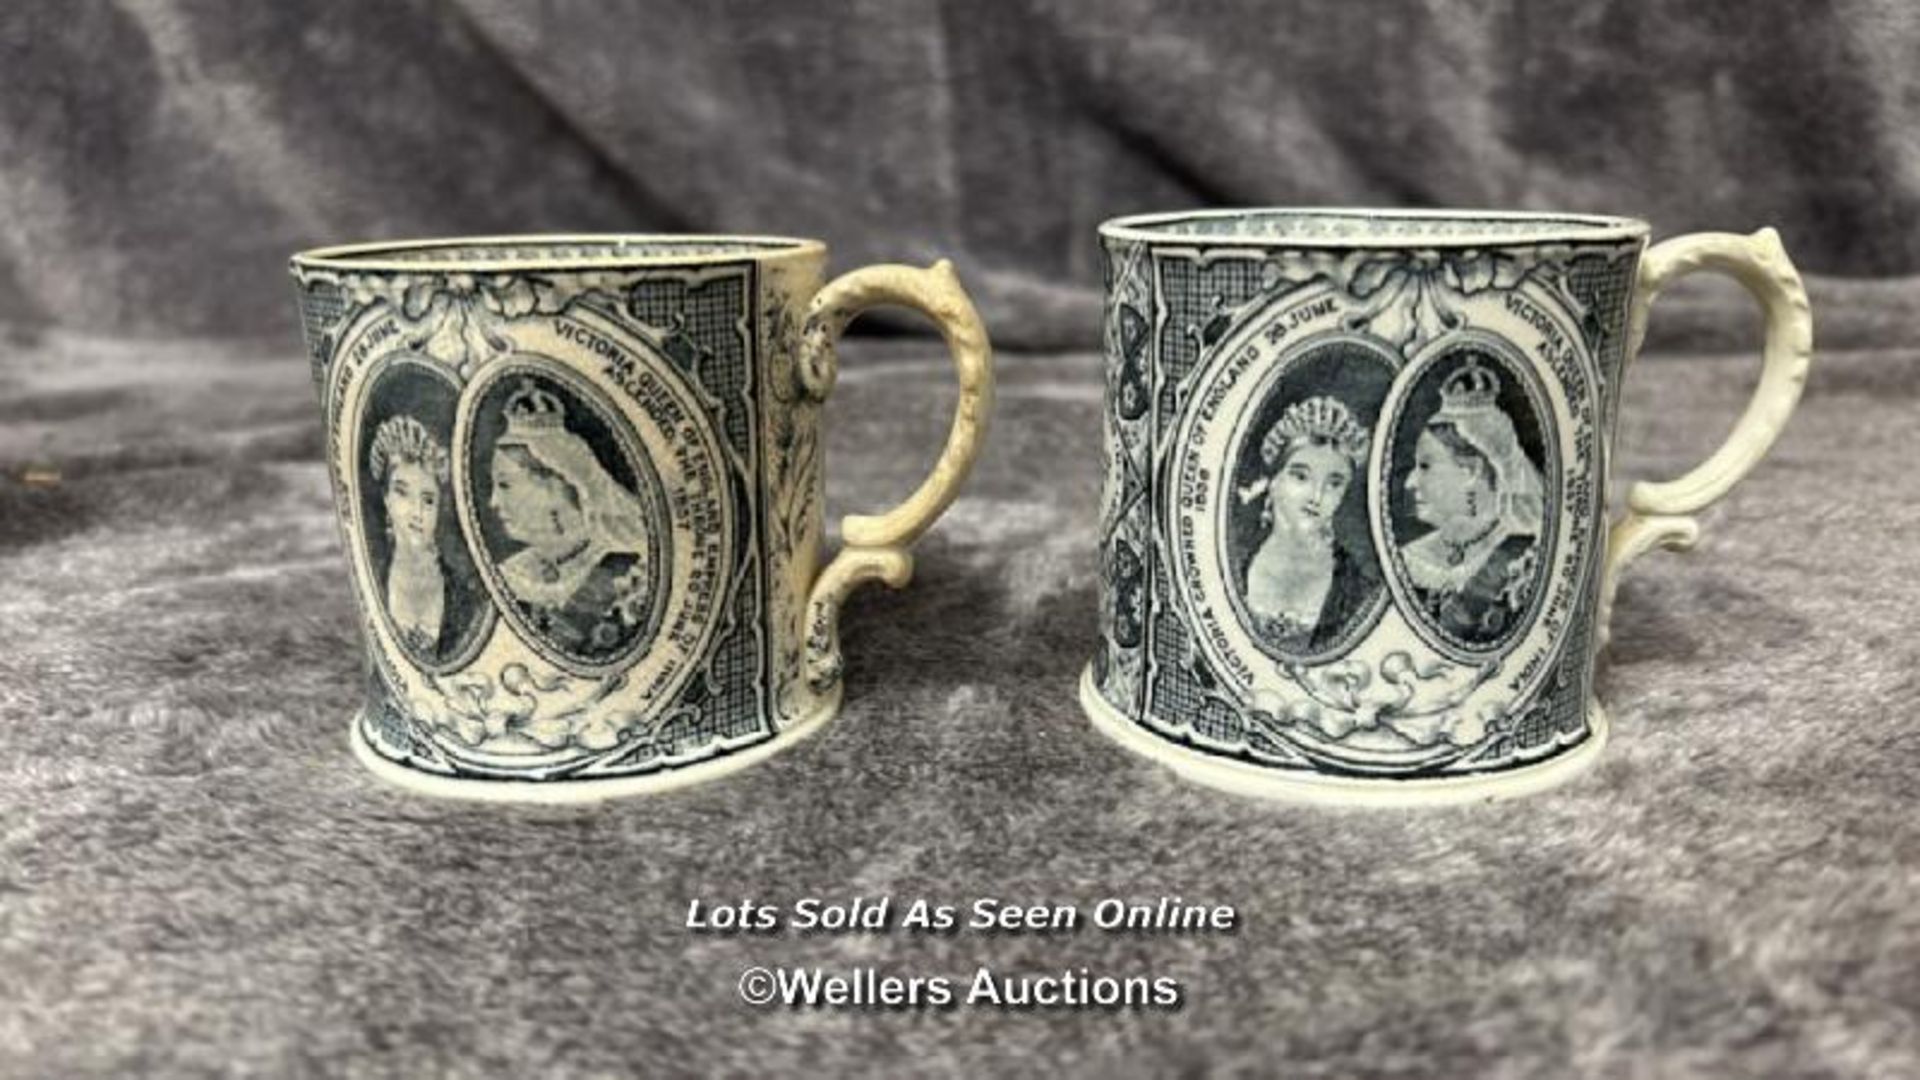 Two William Whiteley Queen Victoria longest reign mugs with one Royal Doulton King Edward VII mug - Image 2 of 10